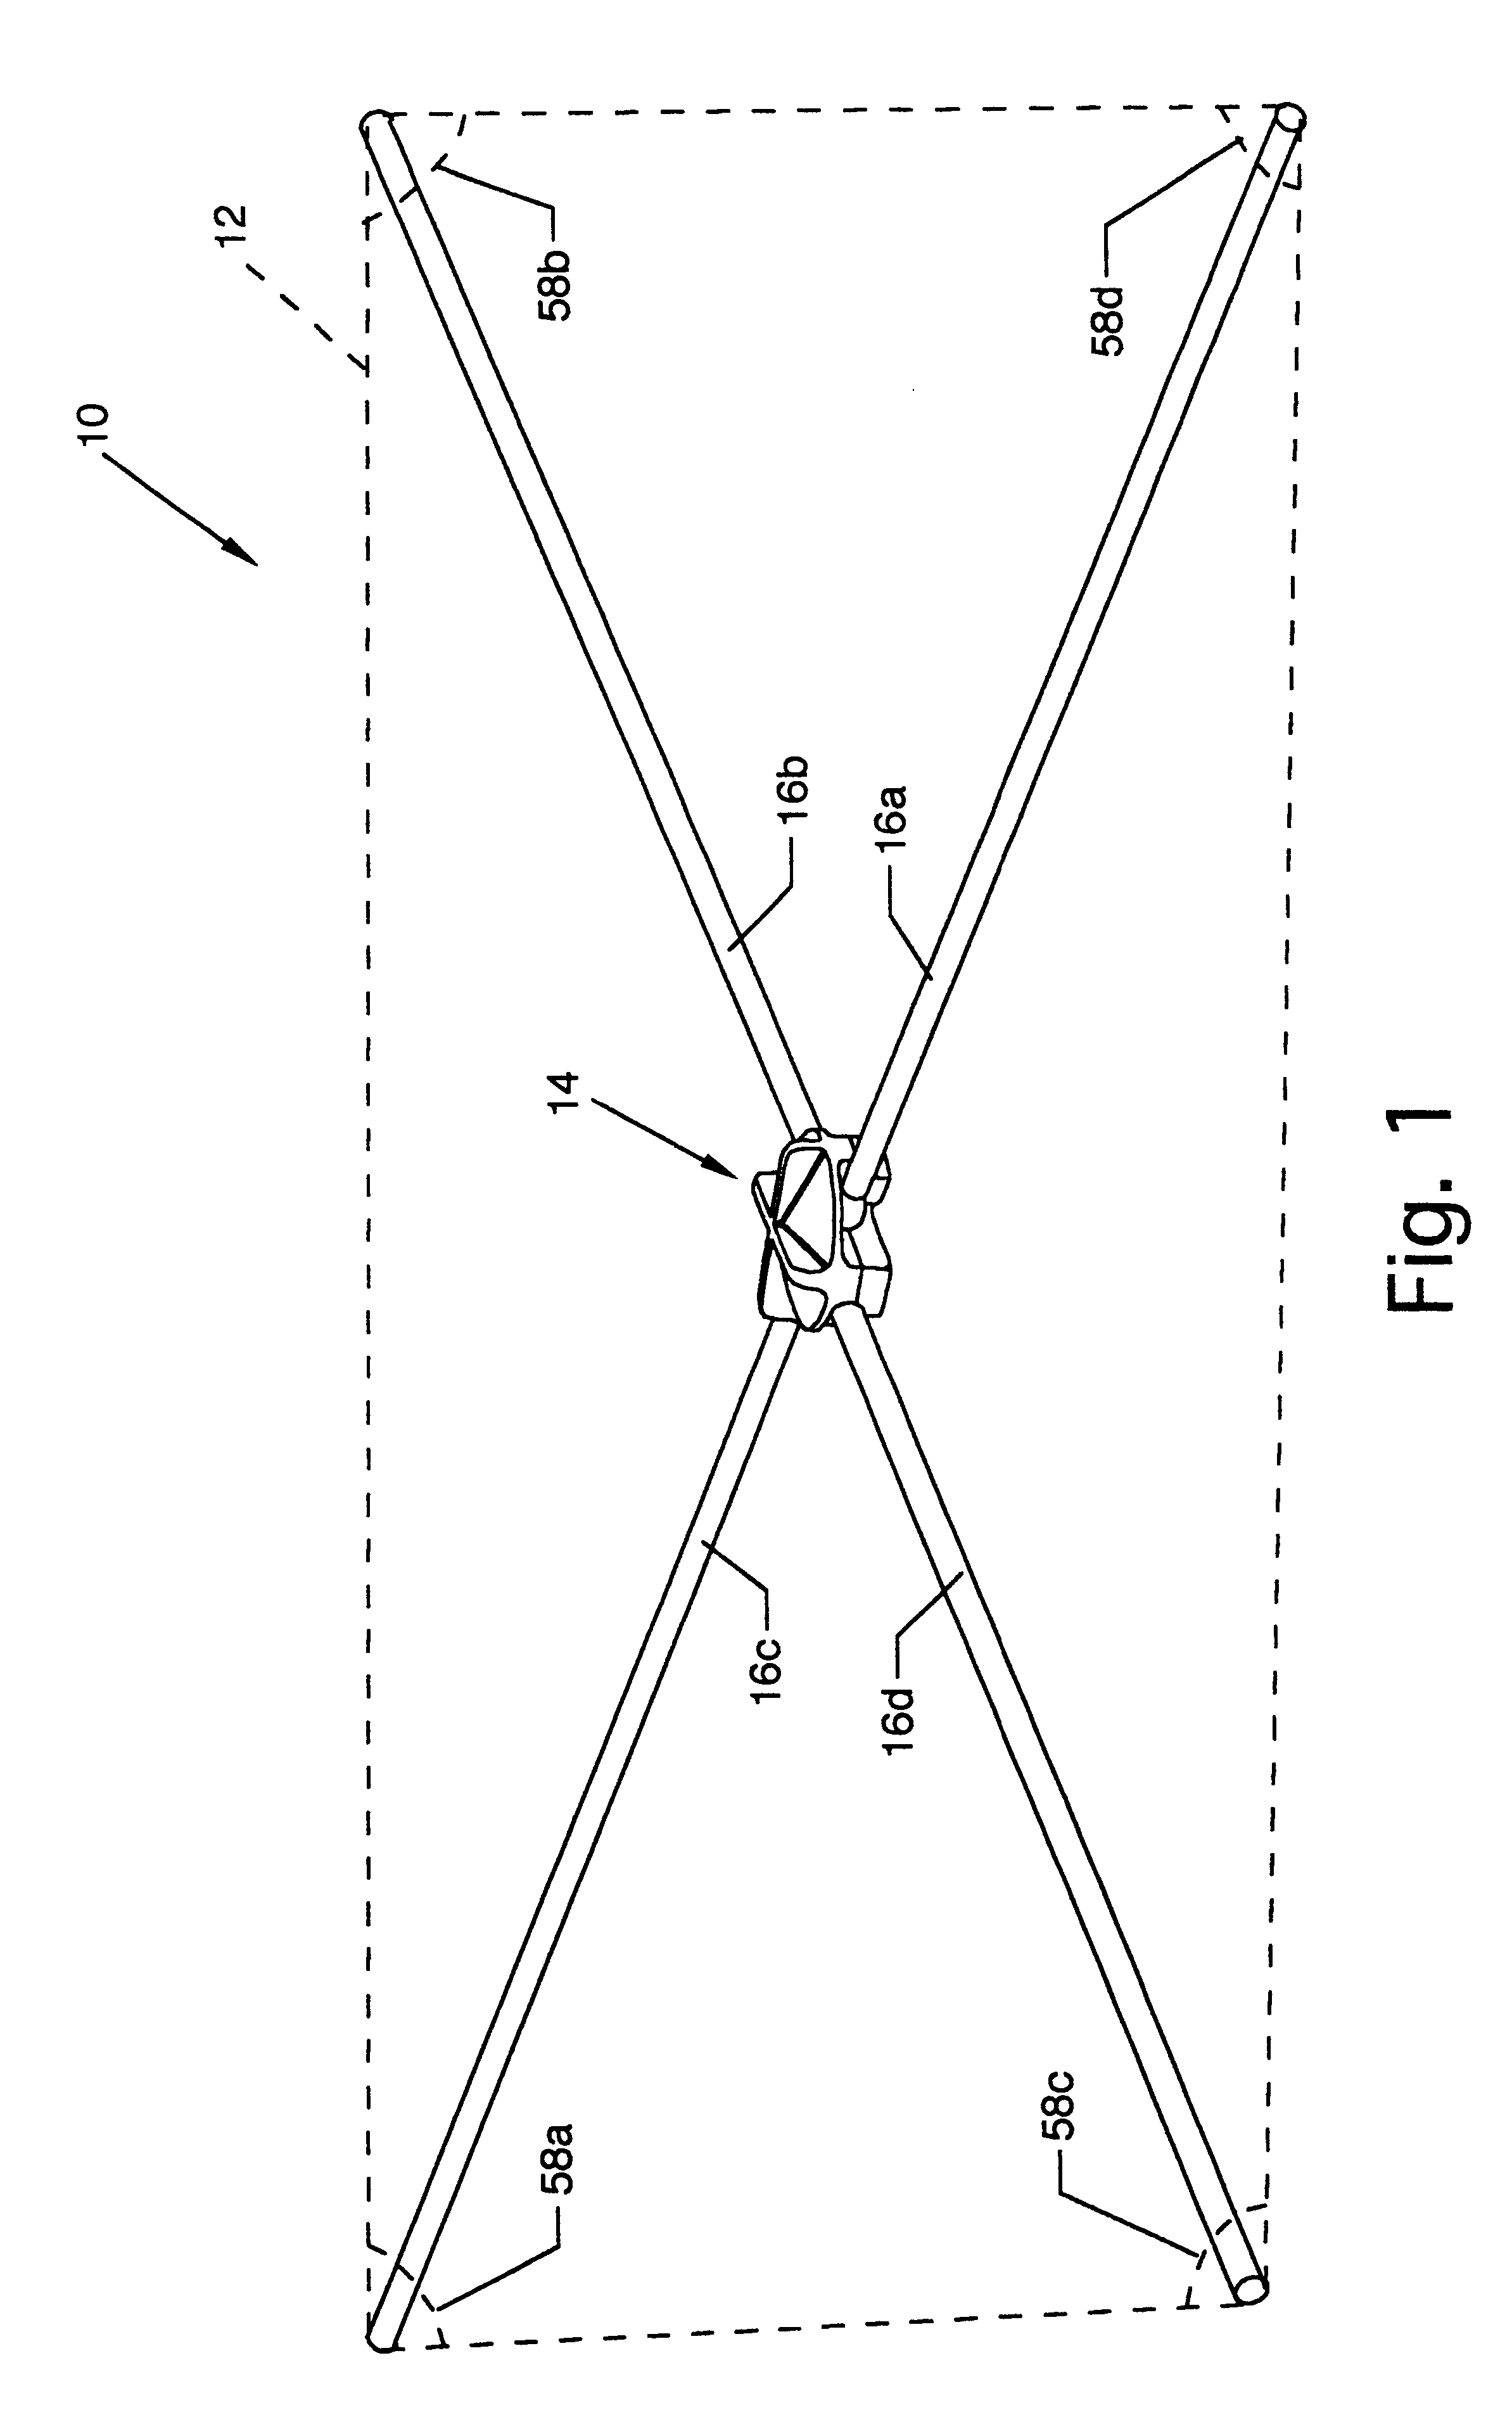 CAM type hub and strut for use in portable and semi-permanent structures